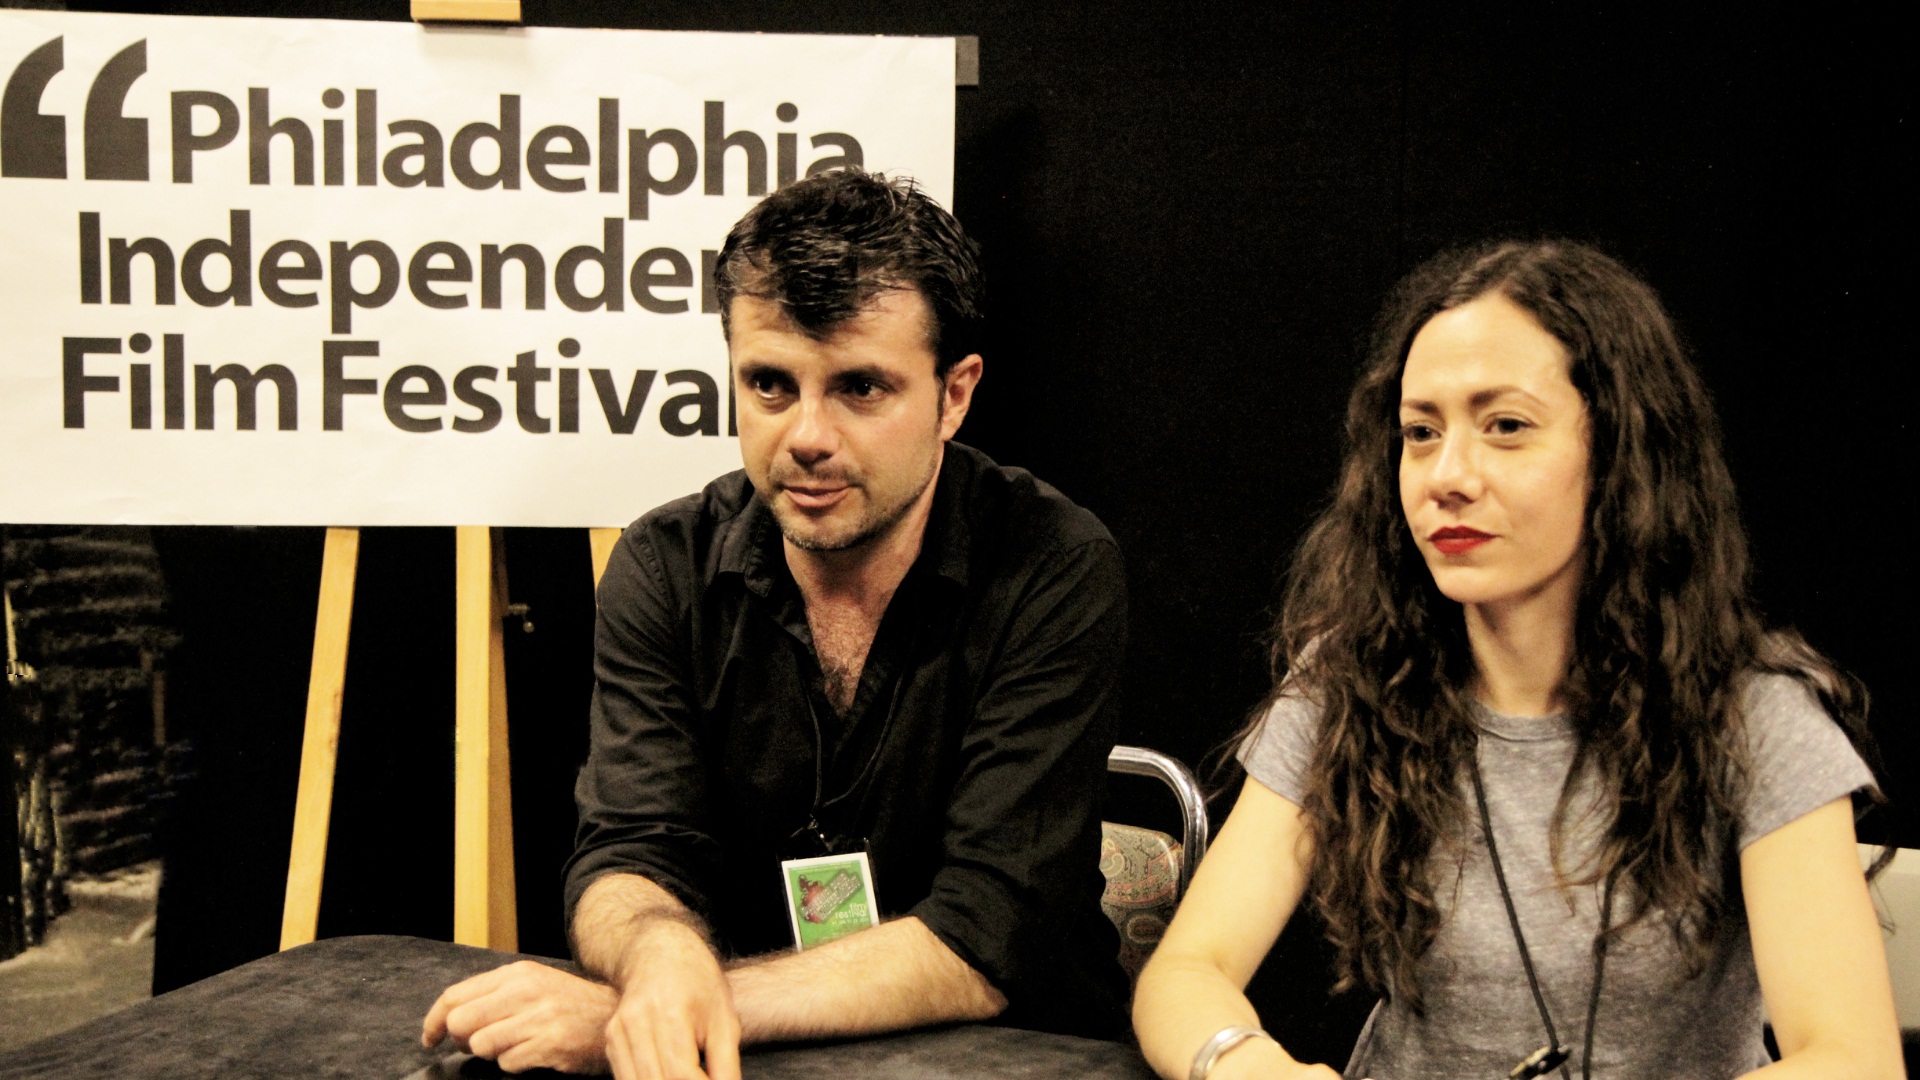 At the press conference of 'Doradus' at the Philadelphia Independent Film Festival 2014